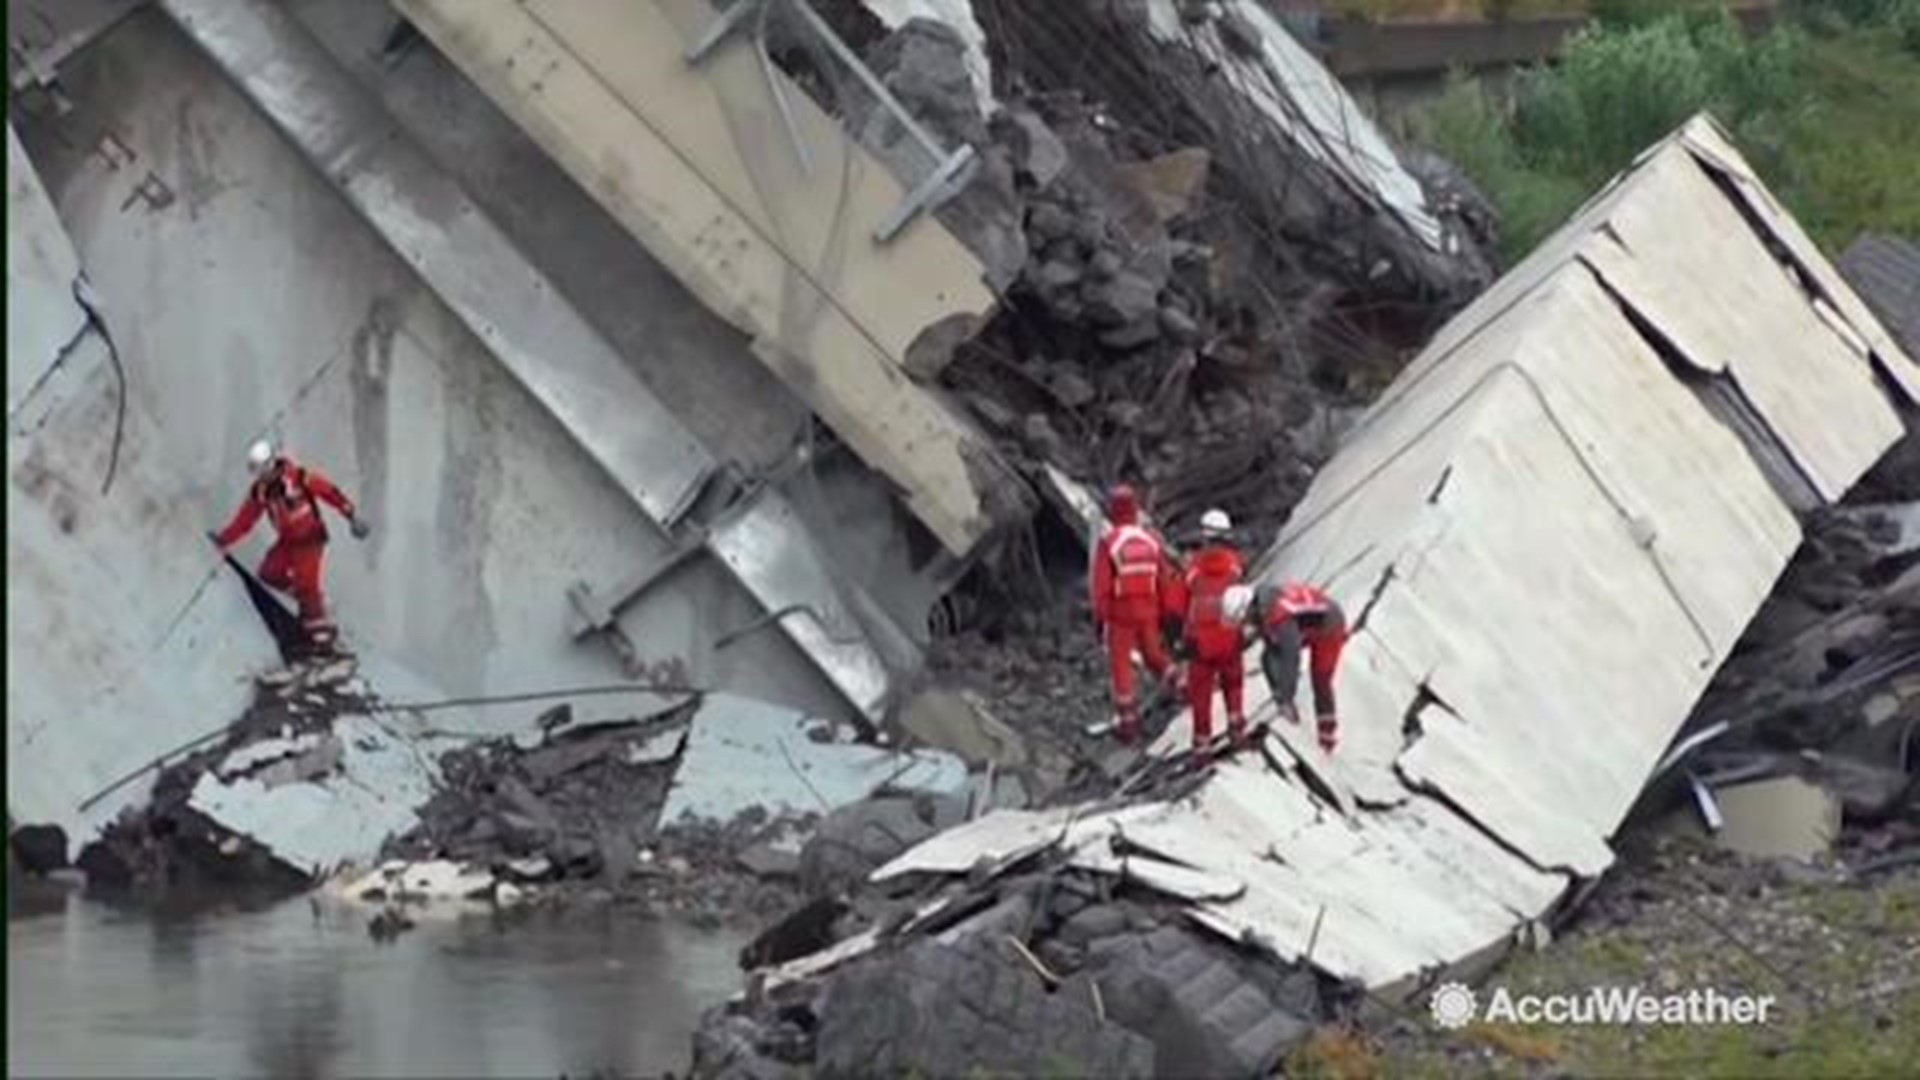 A section of a motorway bridge in the Italian city of Genoa collapsed on August 14 in heavy rain. Ansa said emergency crews reported twent fatalities, with about a dozen vehicles crushed in the collapse.